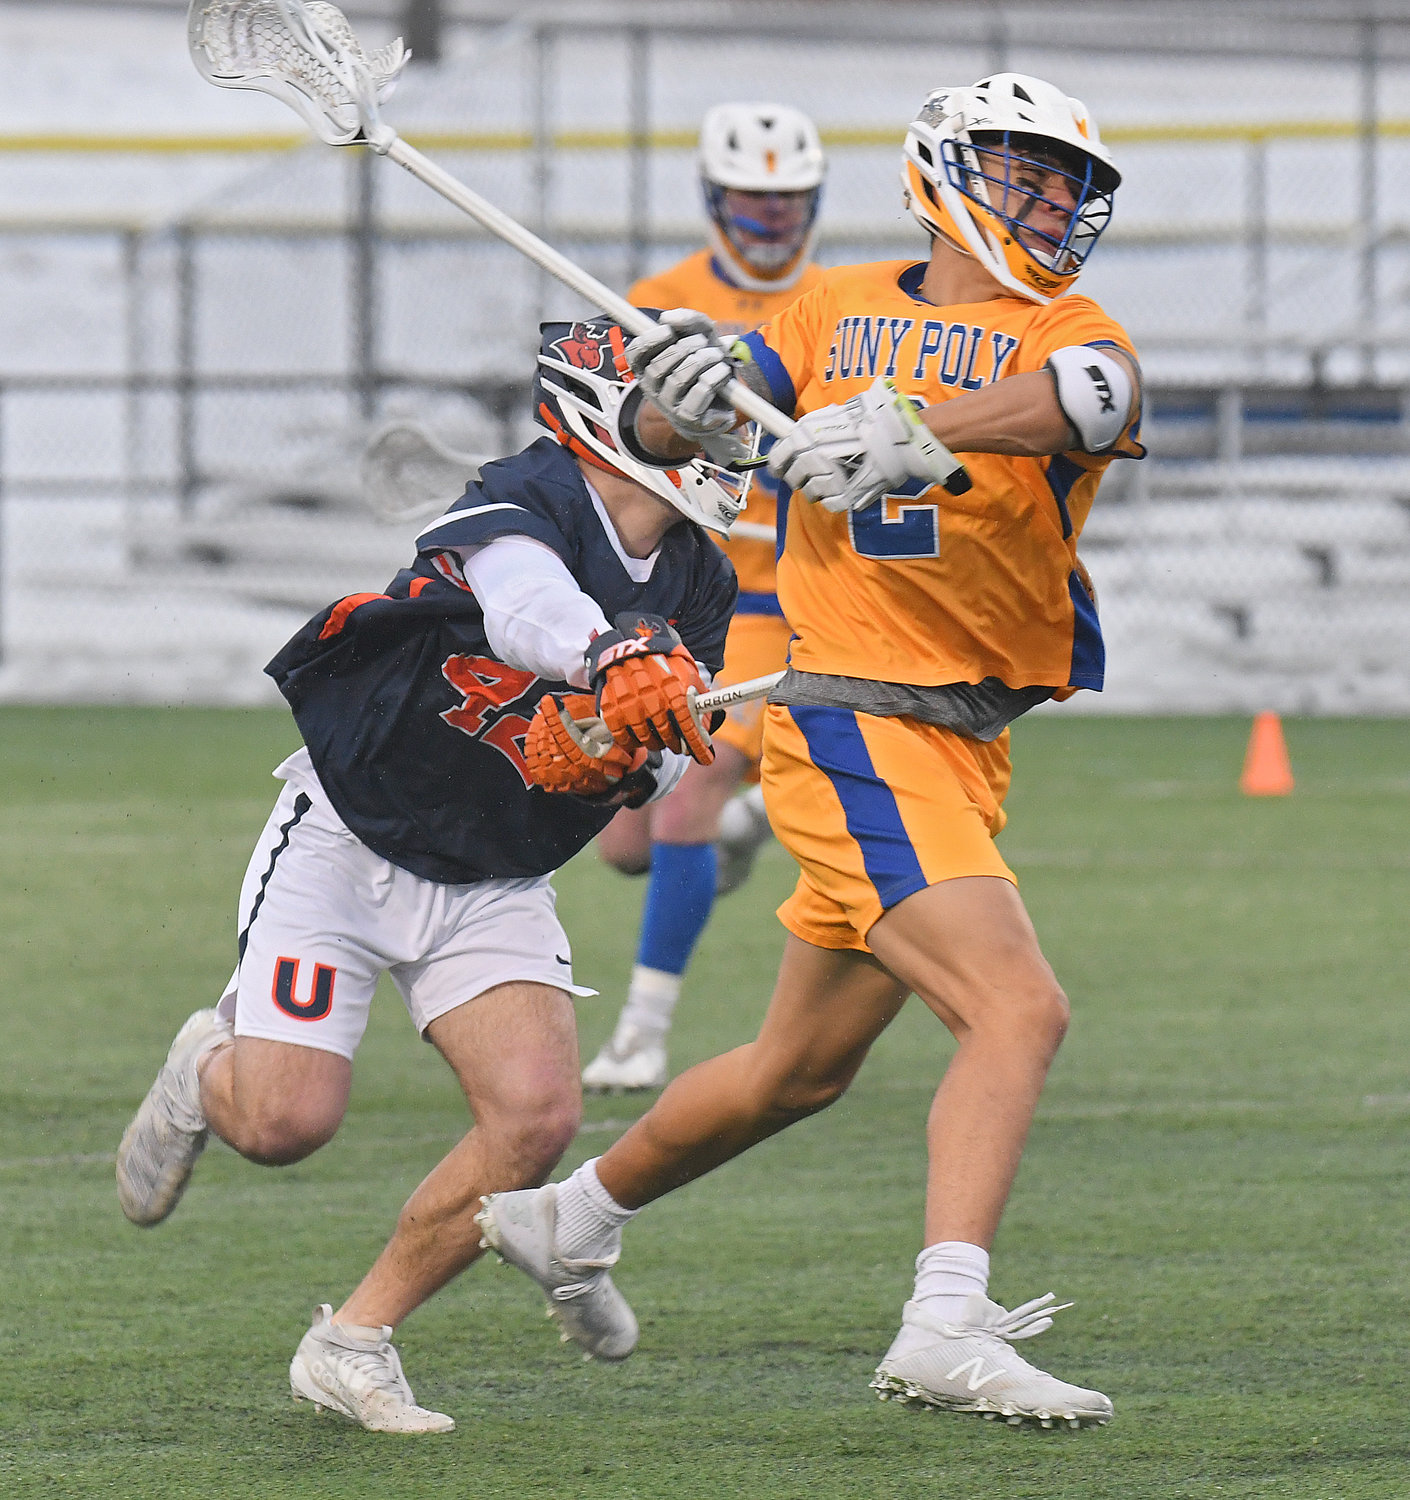 WINDING UP — SUNY Poly's Luke Taylor winds up for a shot with Utica University's Michael Mecca trailing in the first quarter of Thursday afternoon's men's lacrosse game at SUNY Poly. The Pioneers won 4-1.